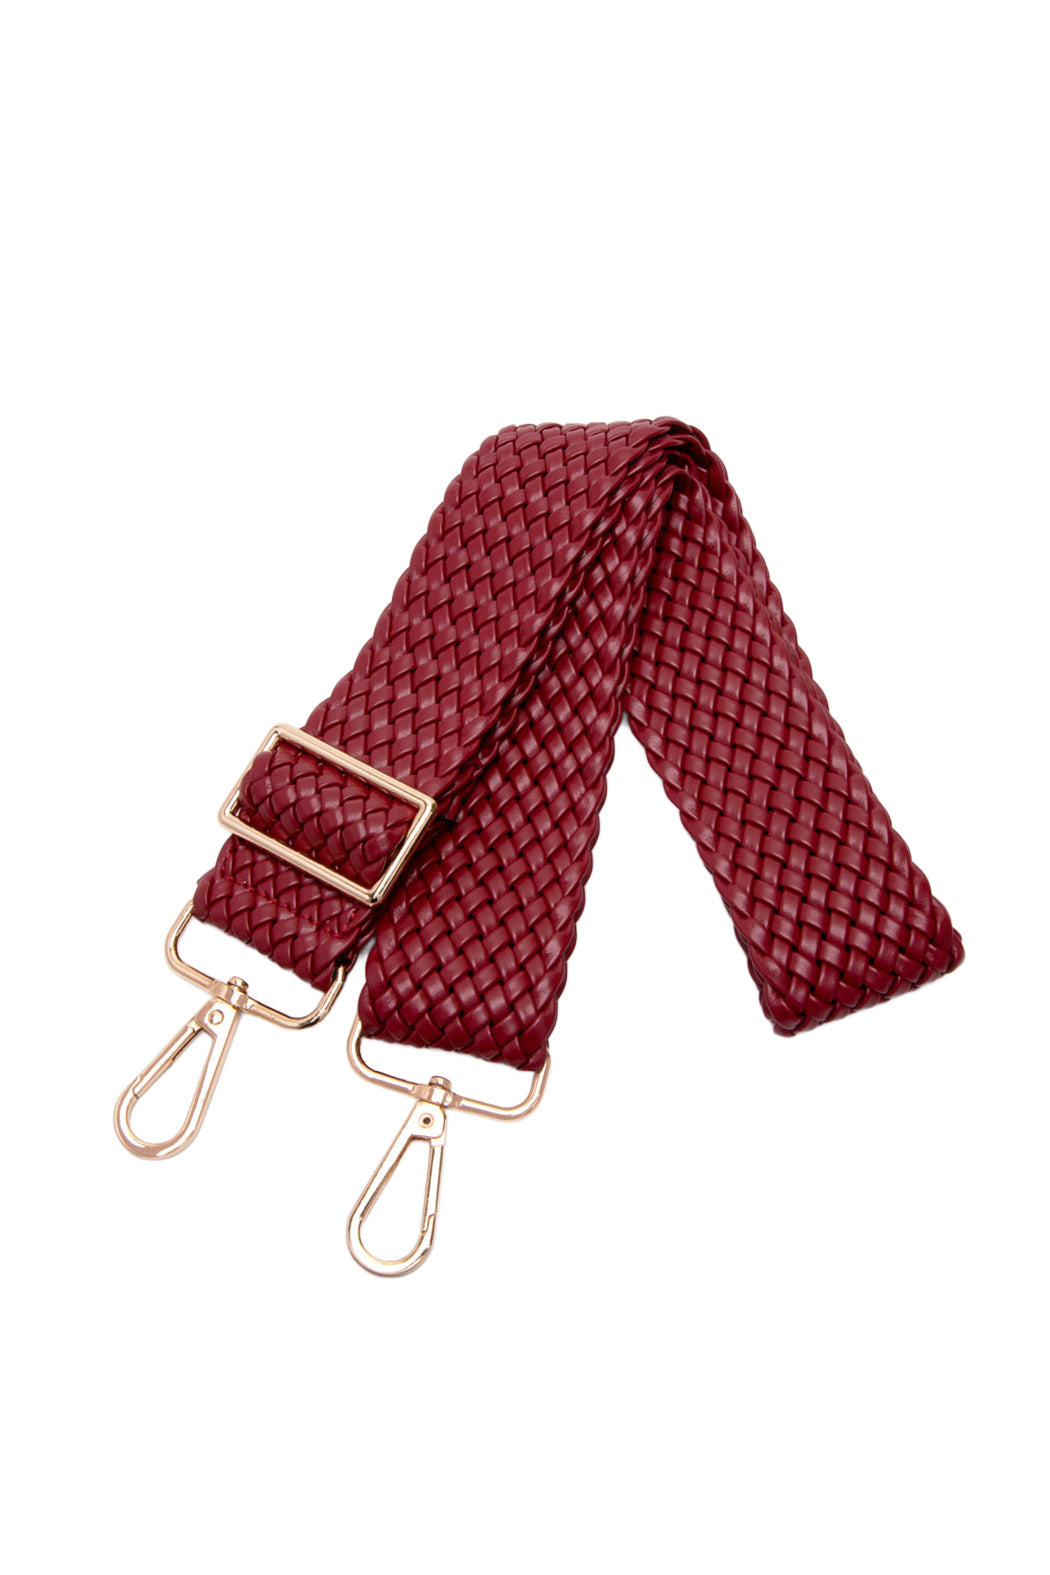 Woven Leather Bag Strap